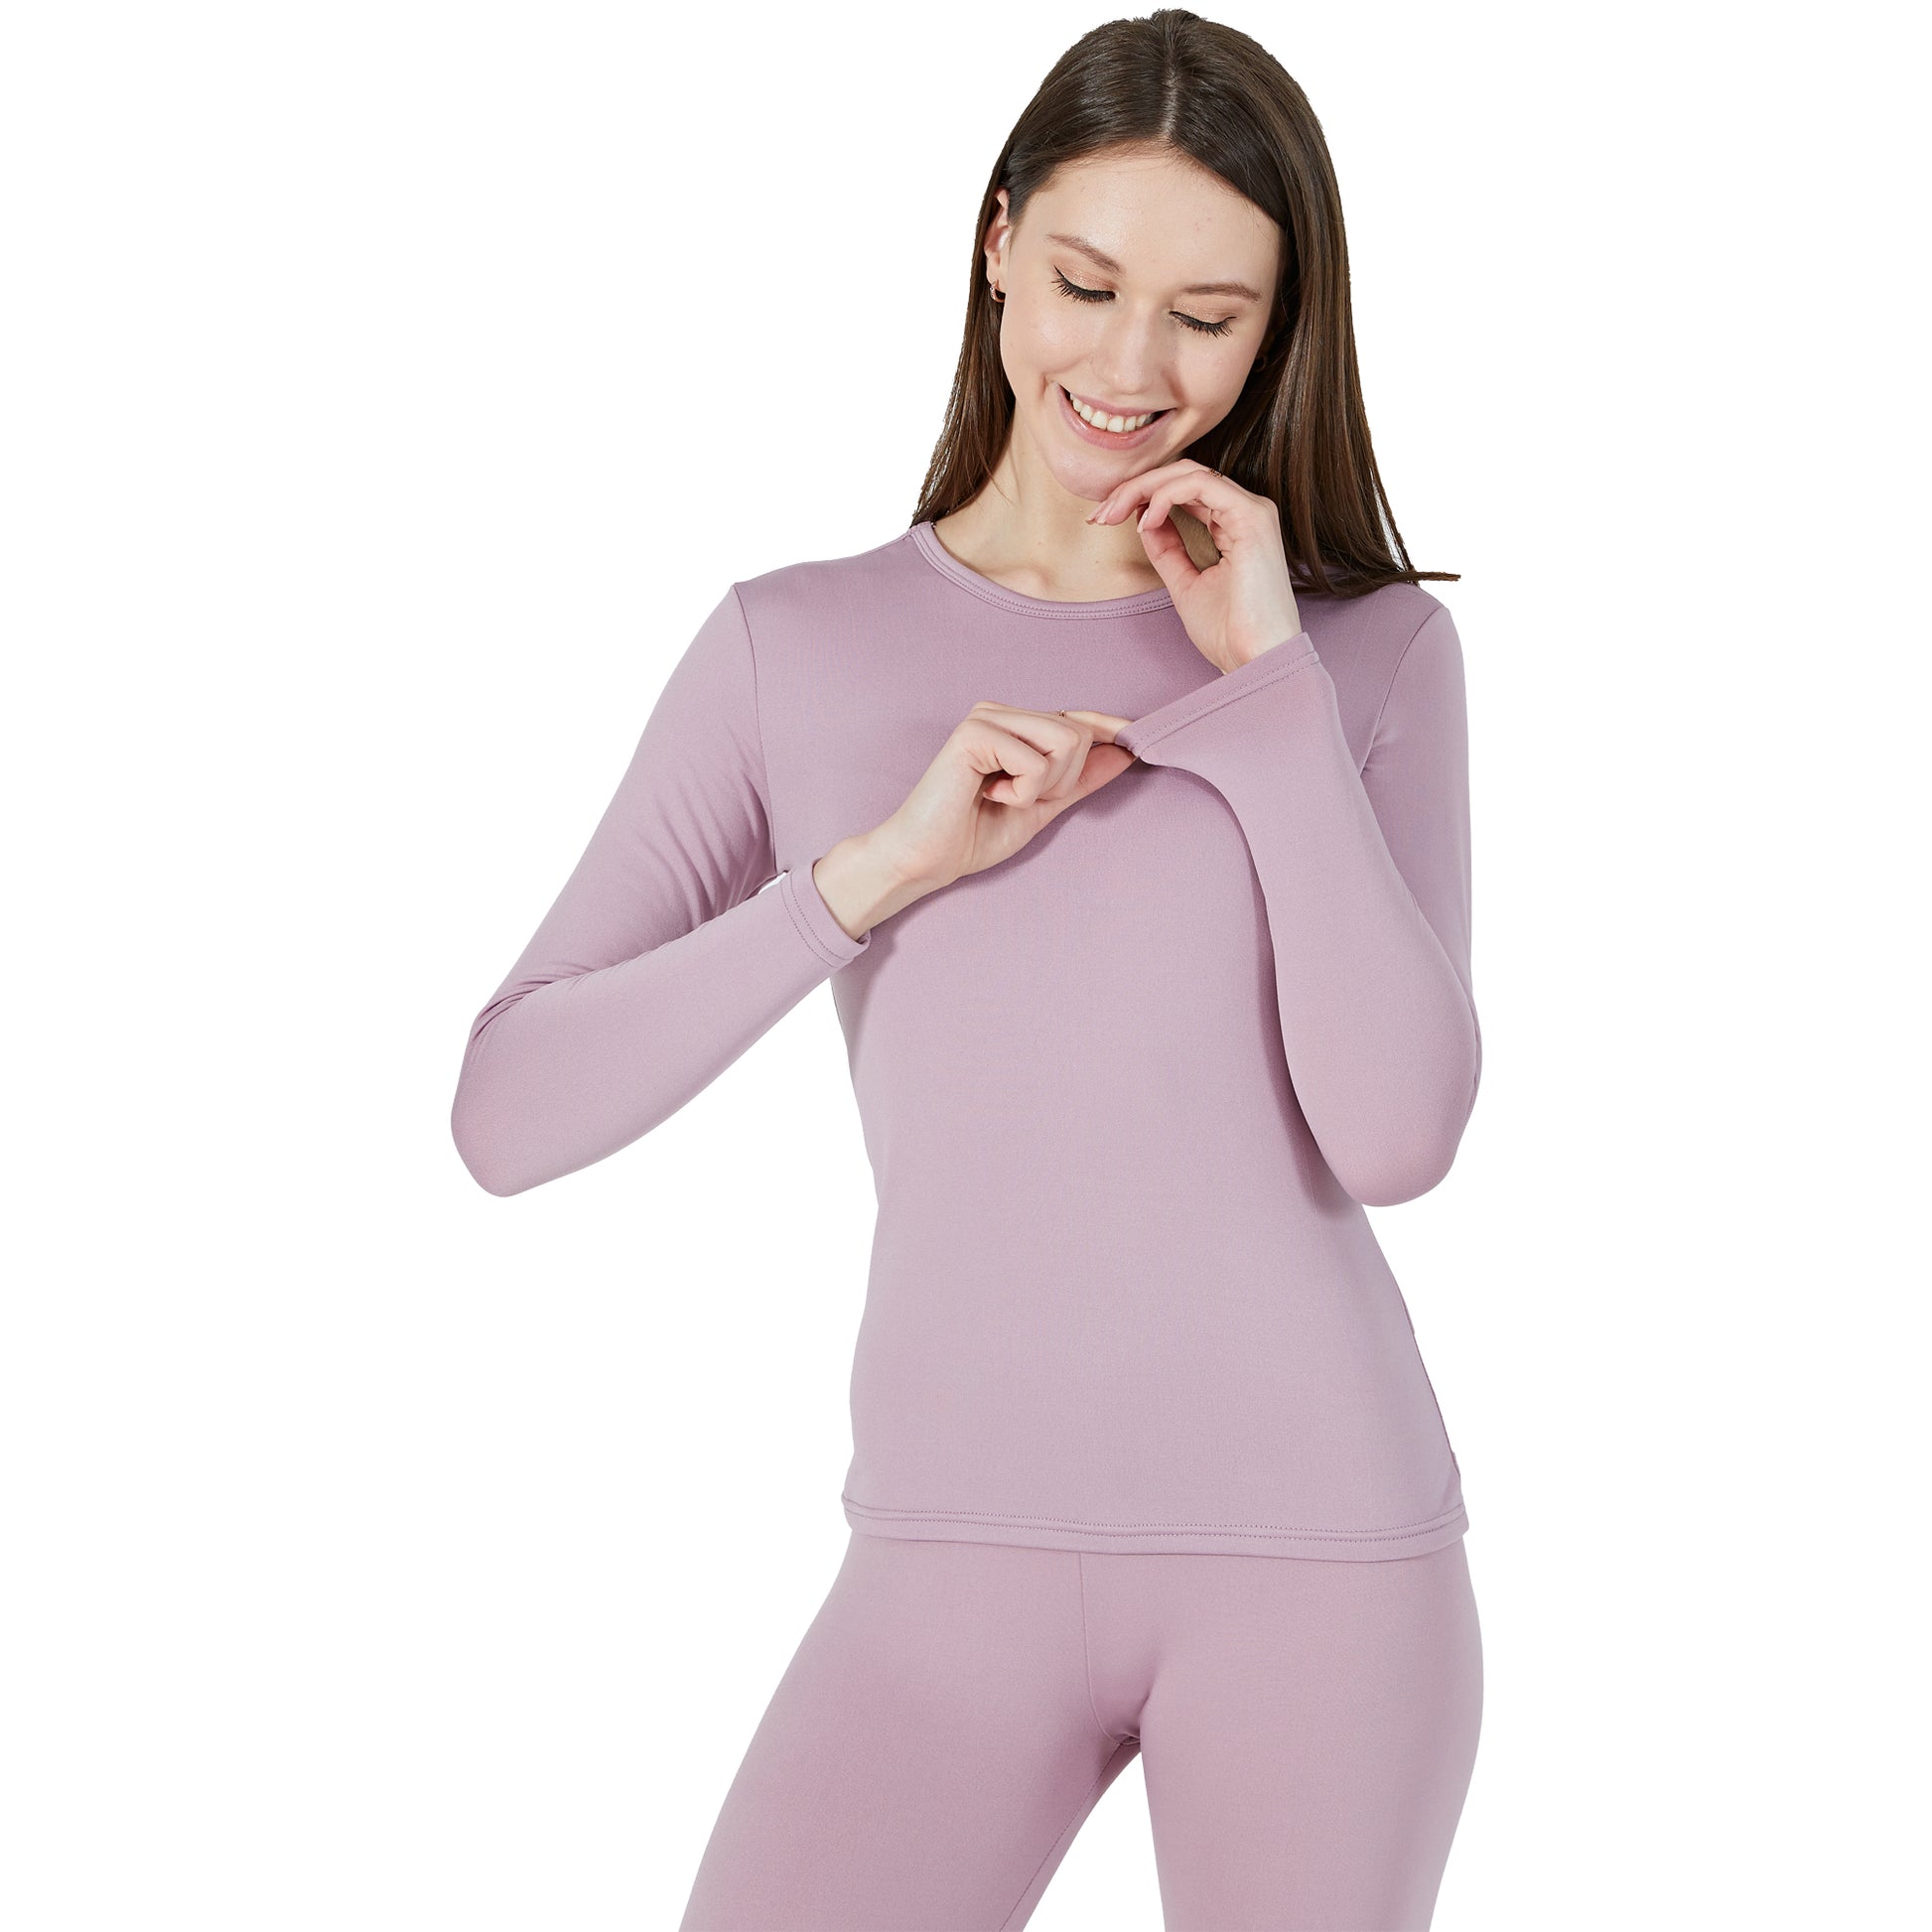 Truactivewear Thermals Thermal Sets Moisture Wicking Super Soft